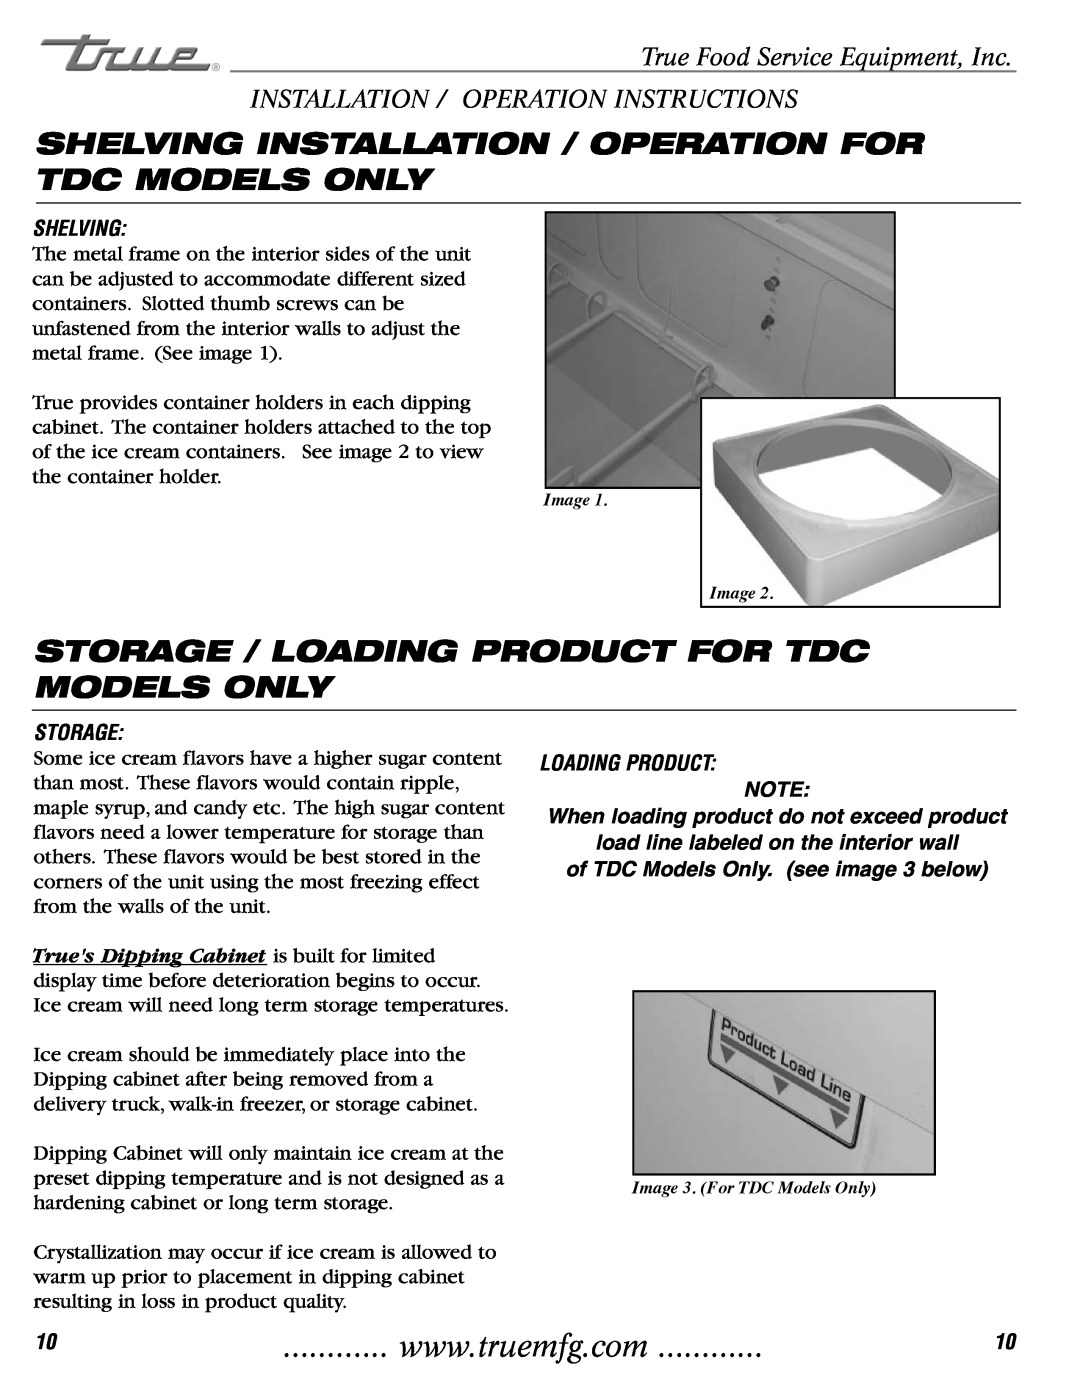 True Manufacturing Company TDC-47, THDC-6 Shelving Installation / Operation For Tdc Models Only, Storage, Loading Product 